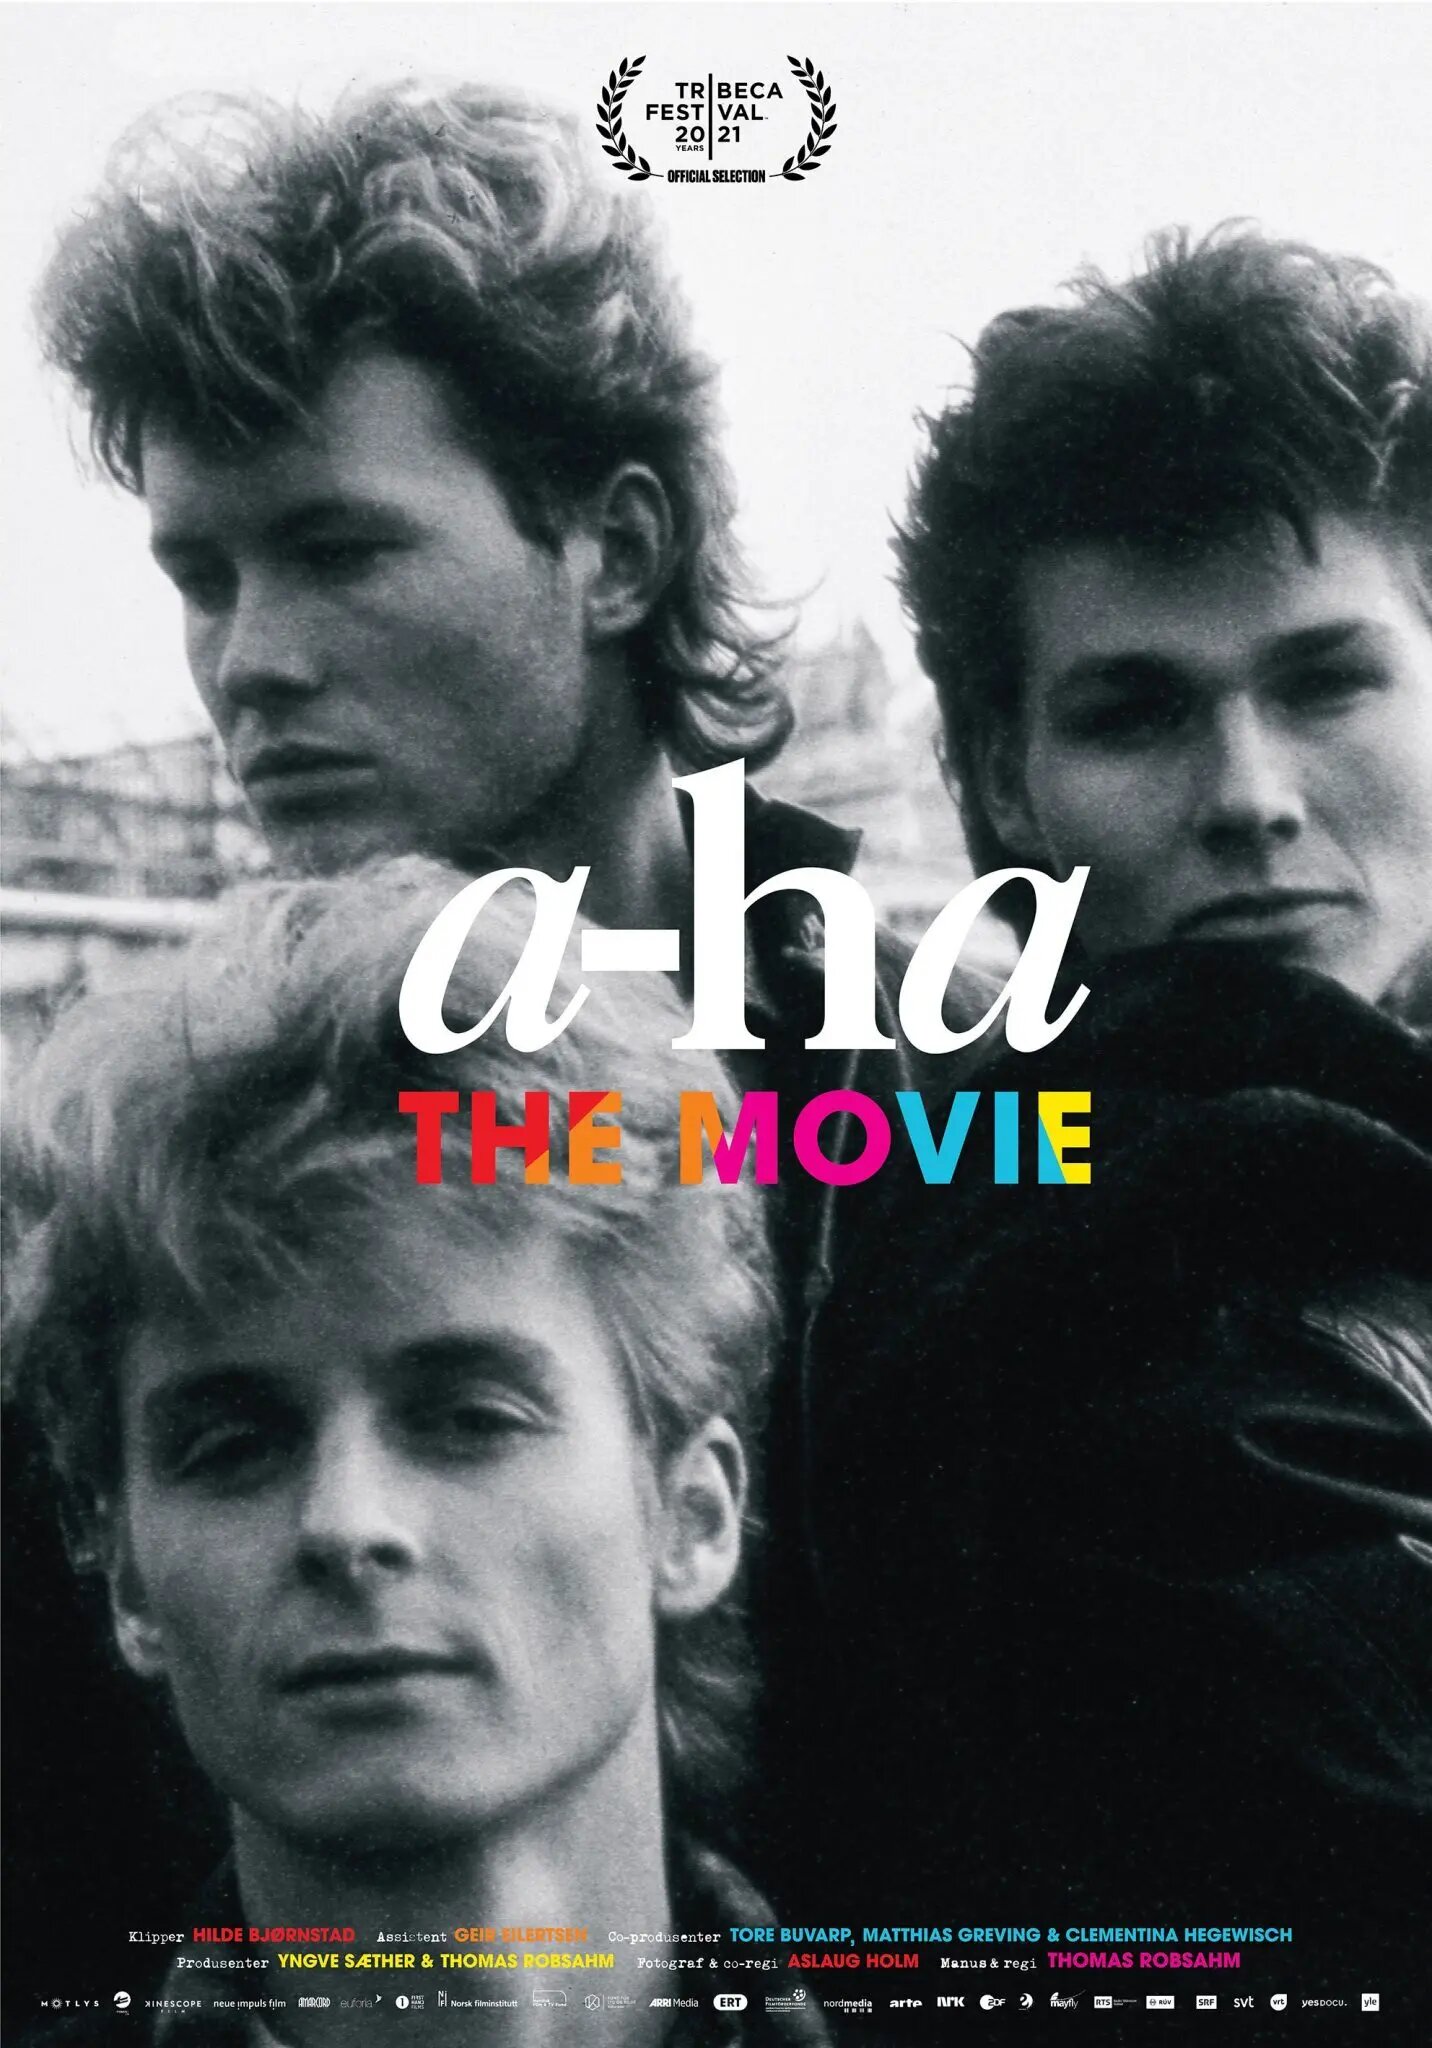 “a-ha, the movie” directed by Aslaug Holm and Thomas Robsahm (with trailer)